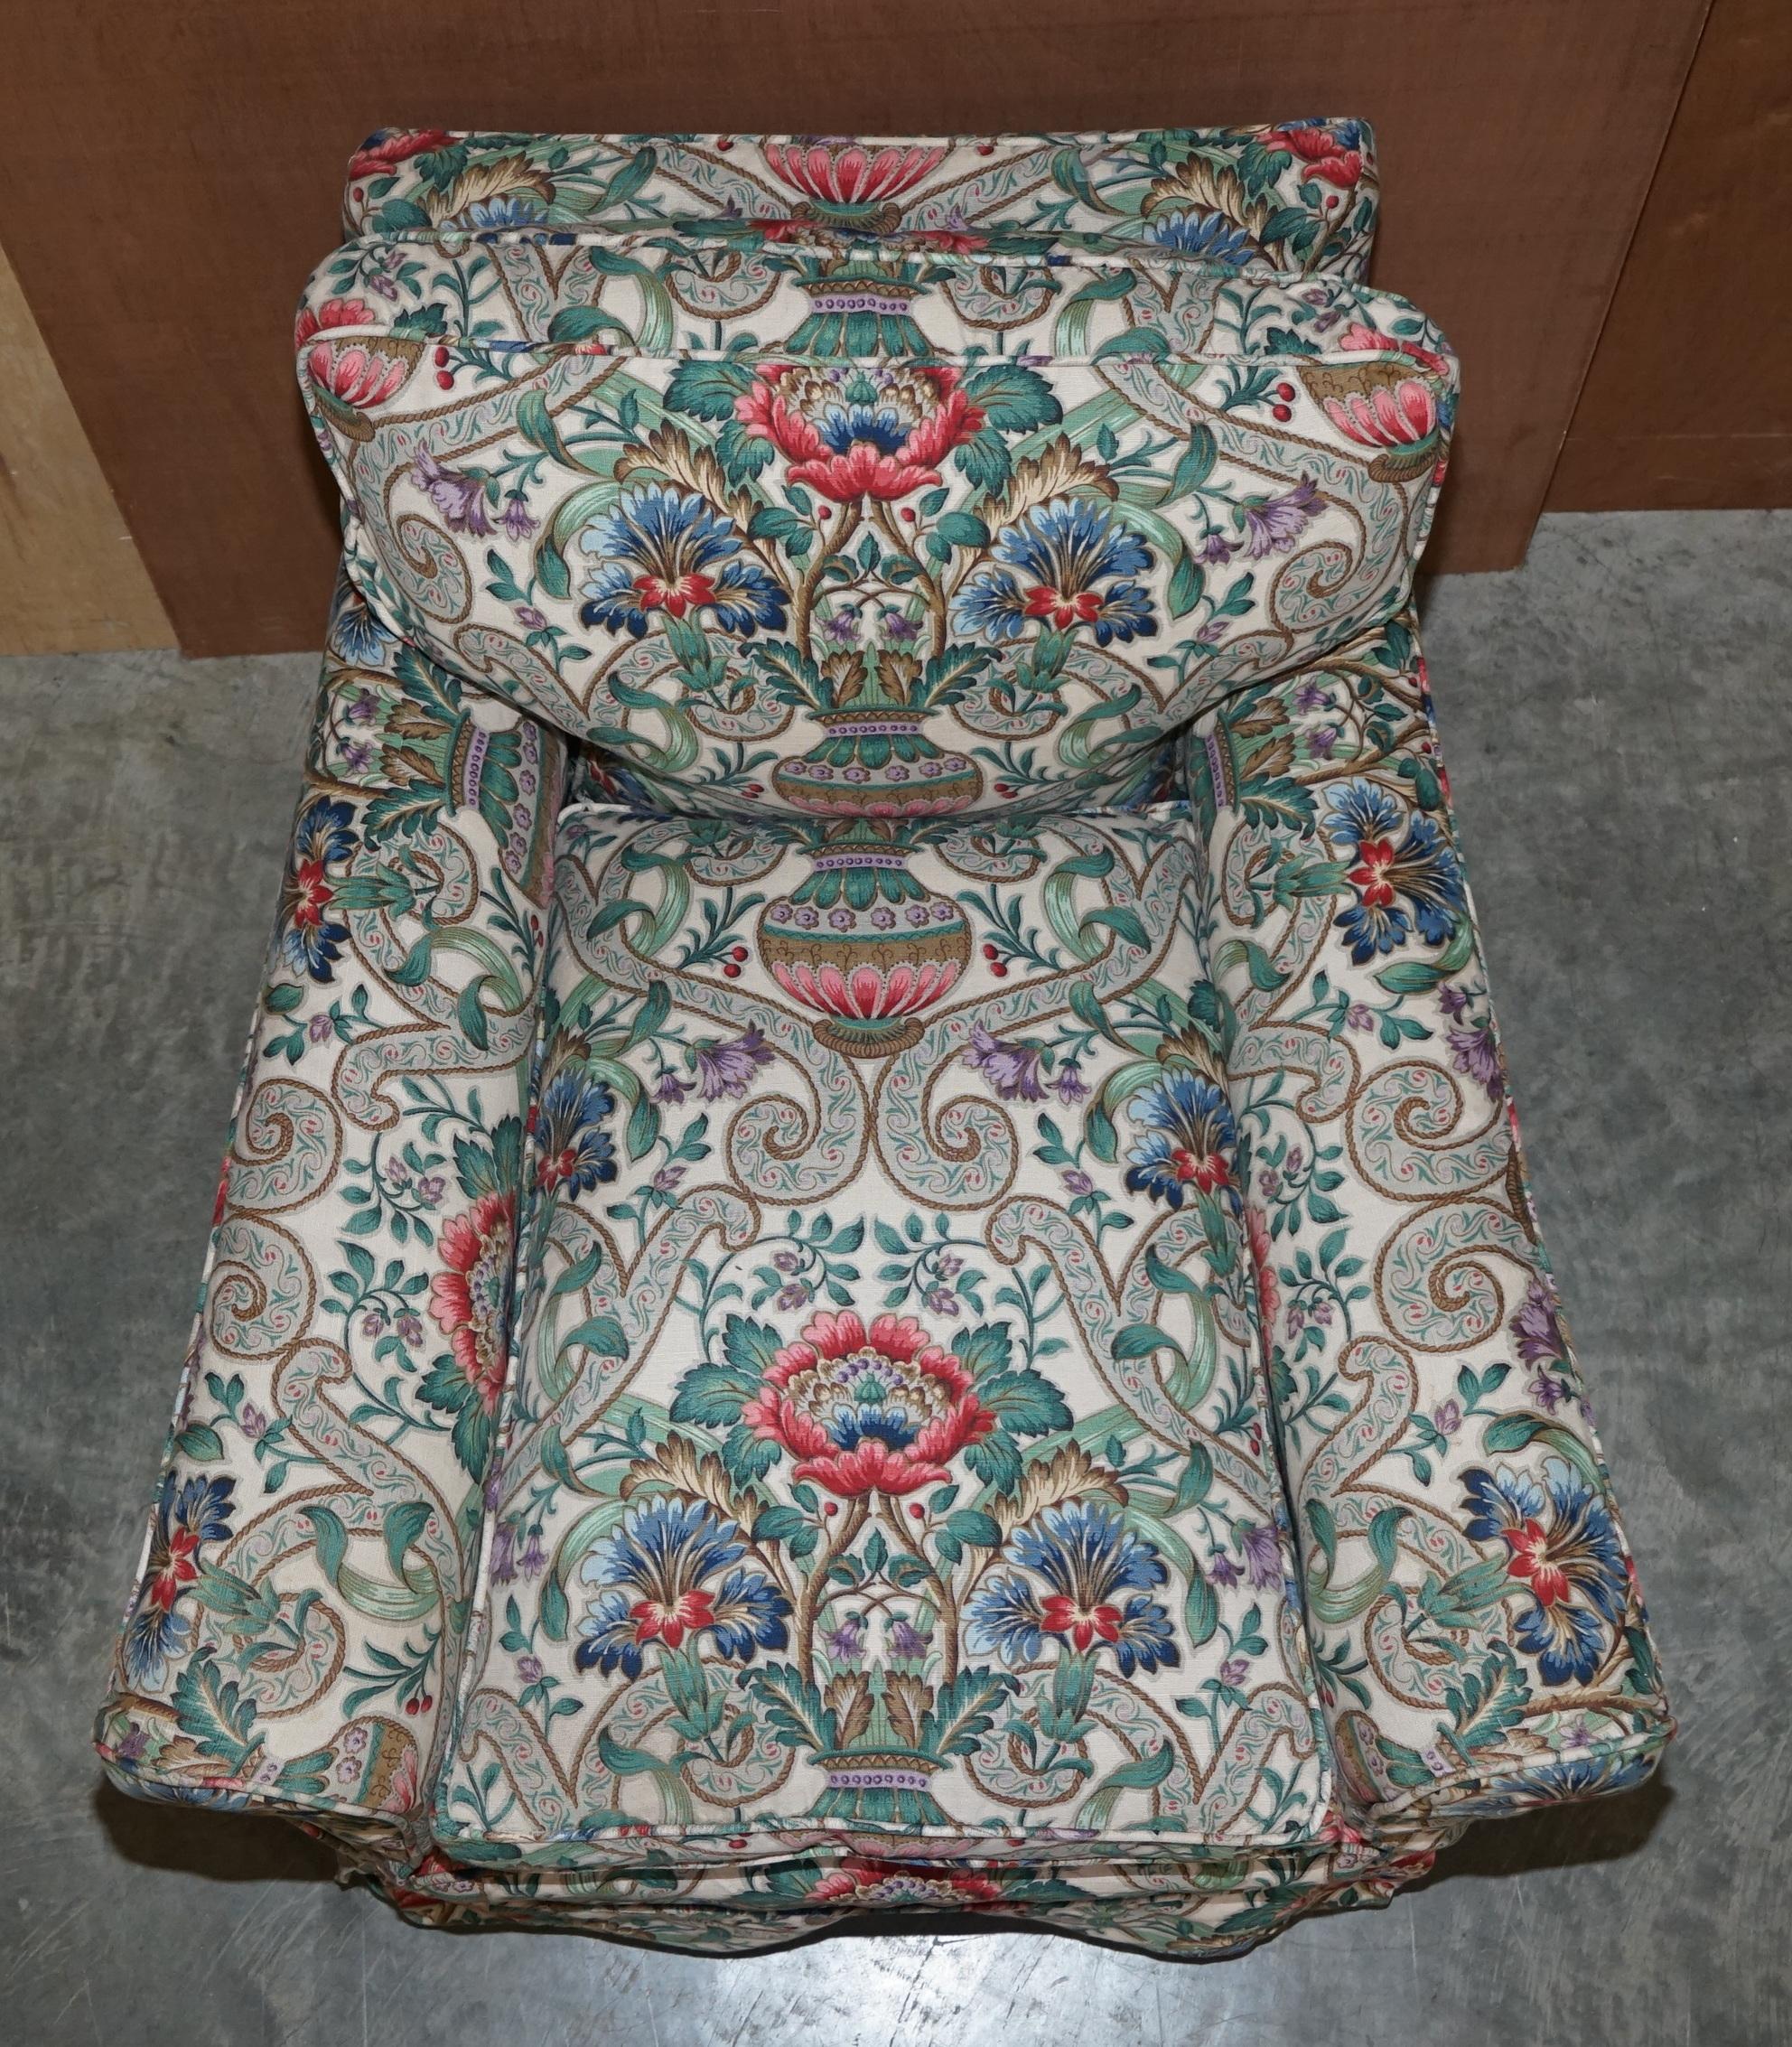 Late Victorian Antique Victorian circa 1900 Club Armchair with Chintz Embroidered Upholstery For Sale